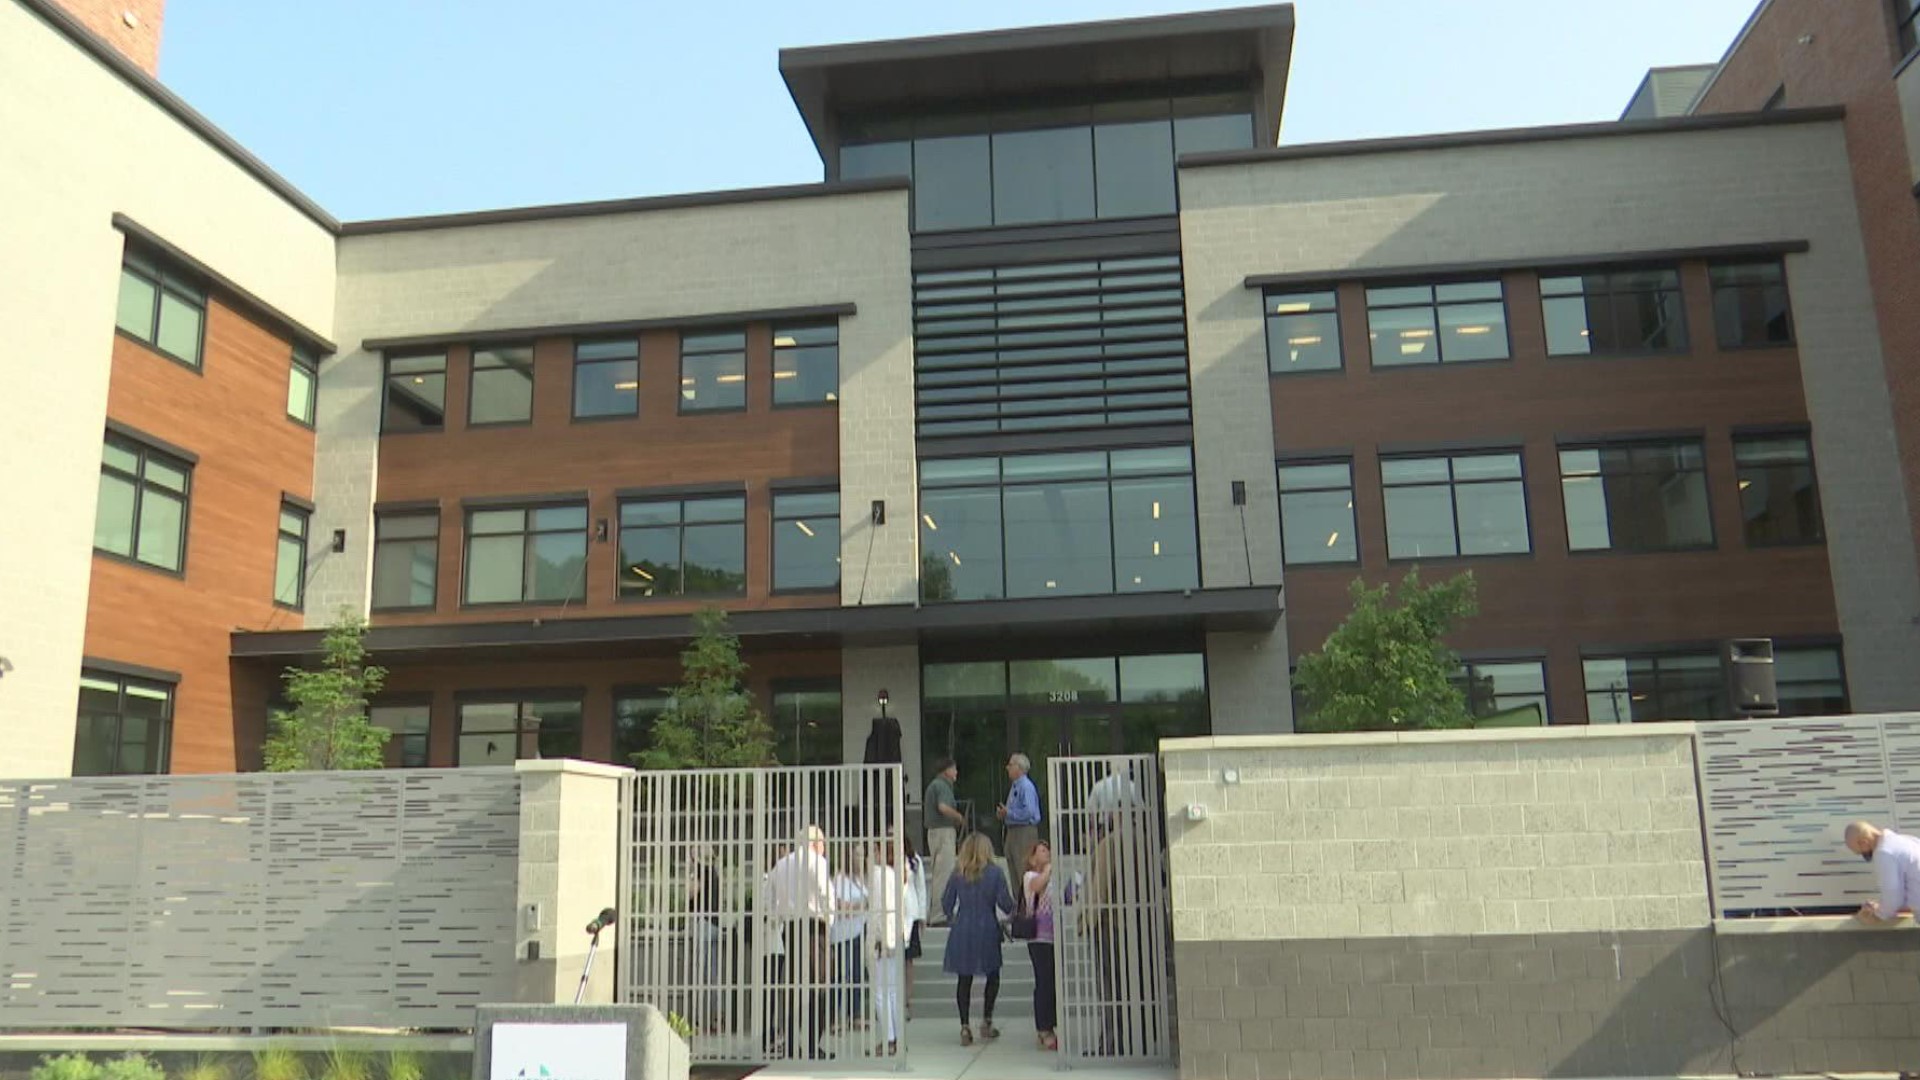 The Center for Women and Children saw a $14.8 million expansion.